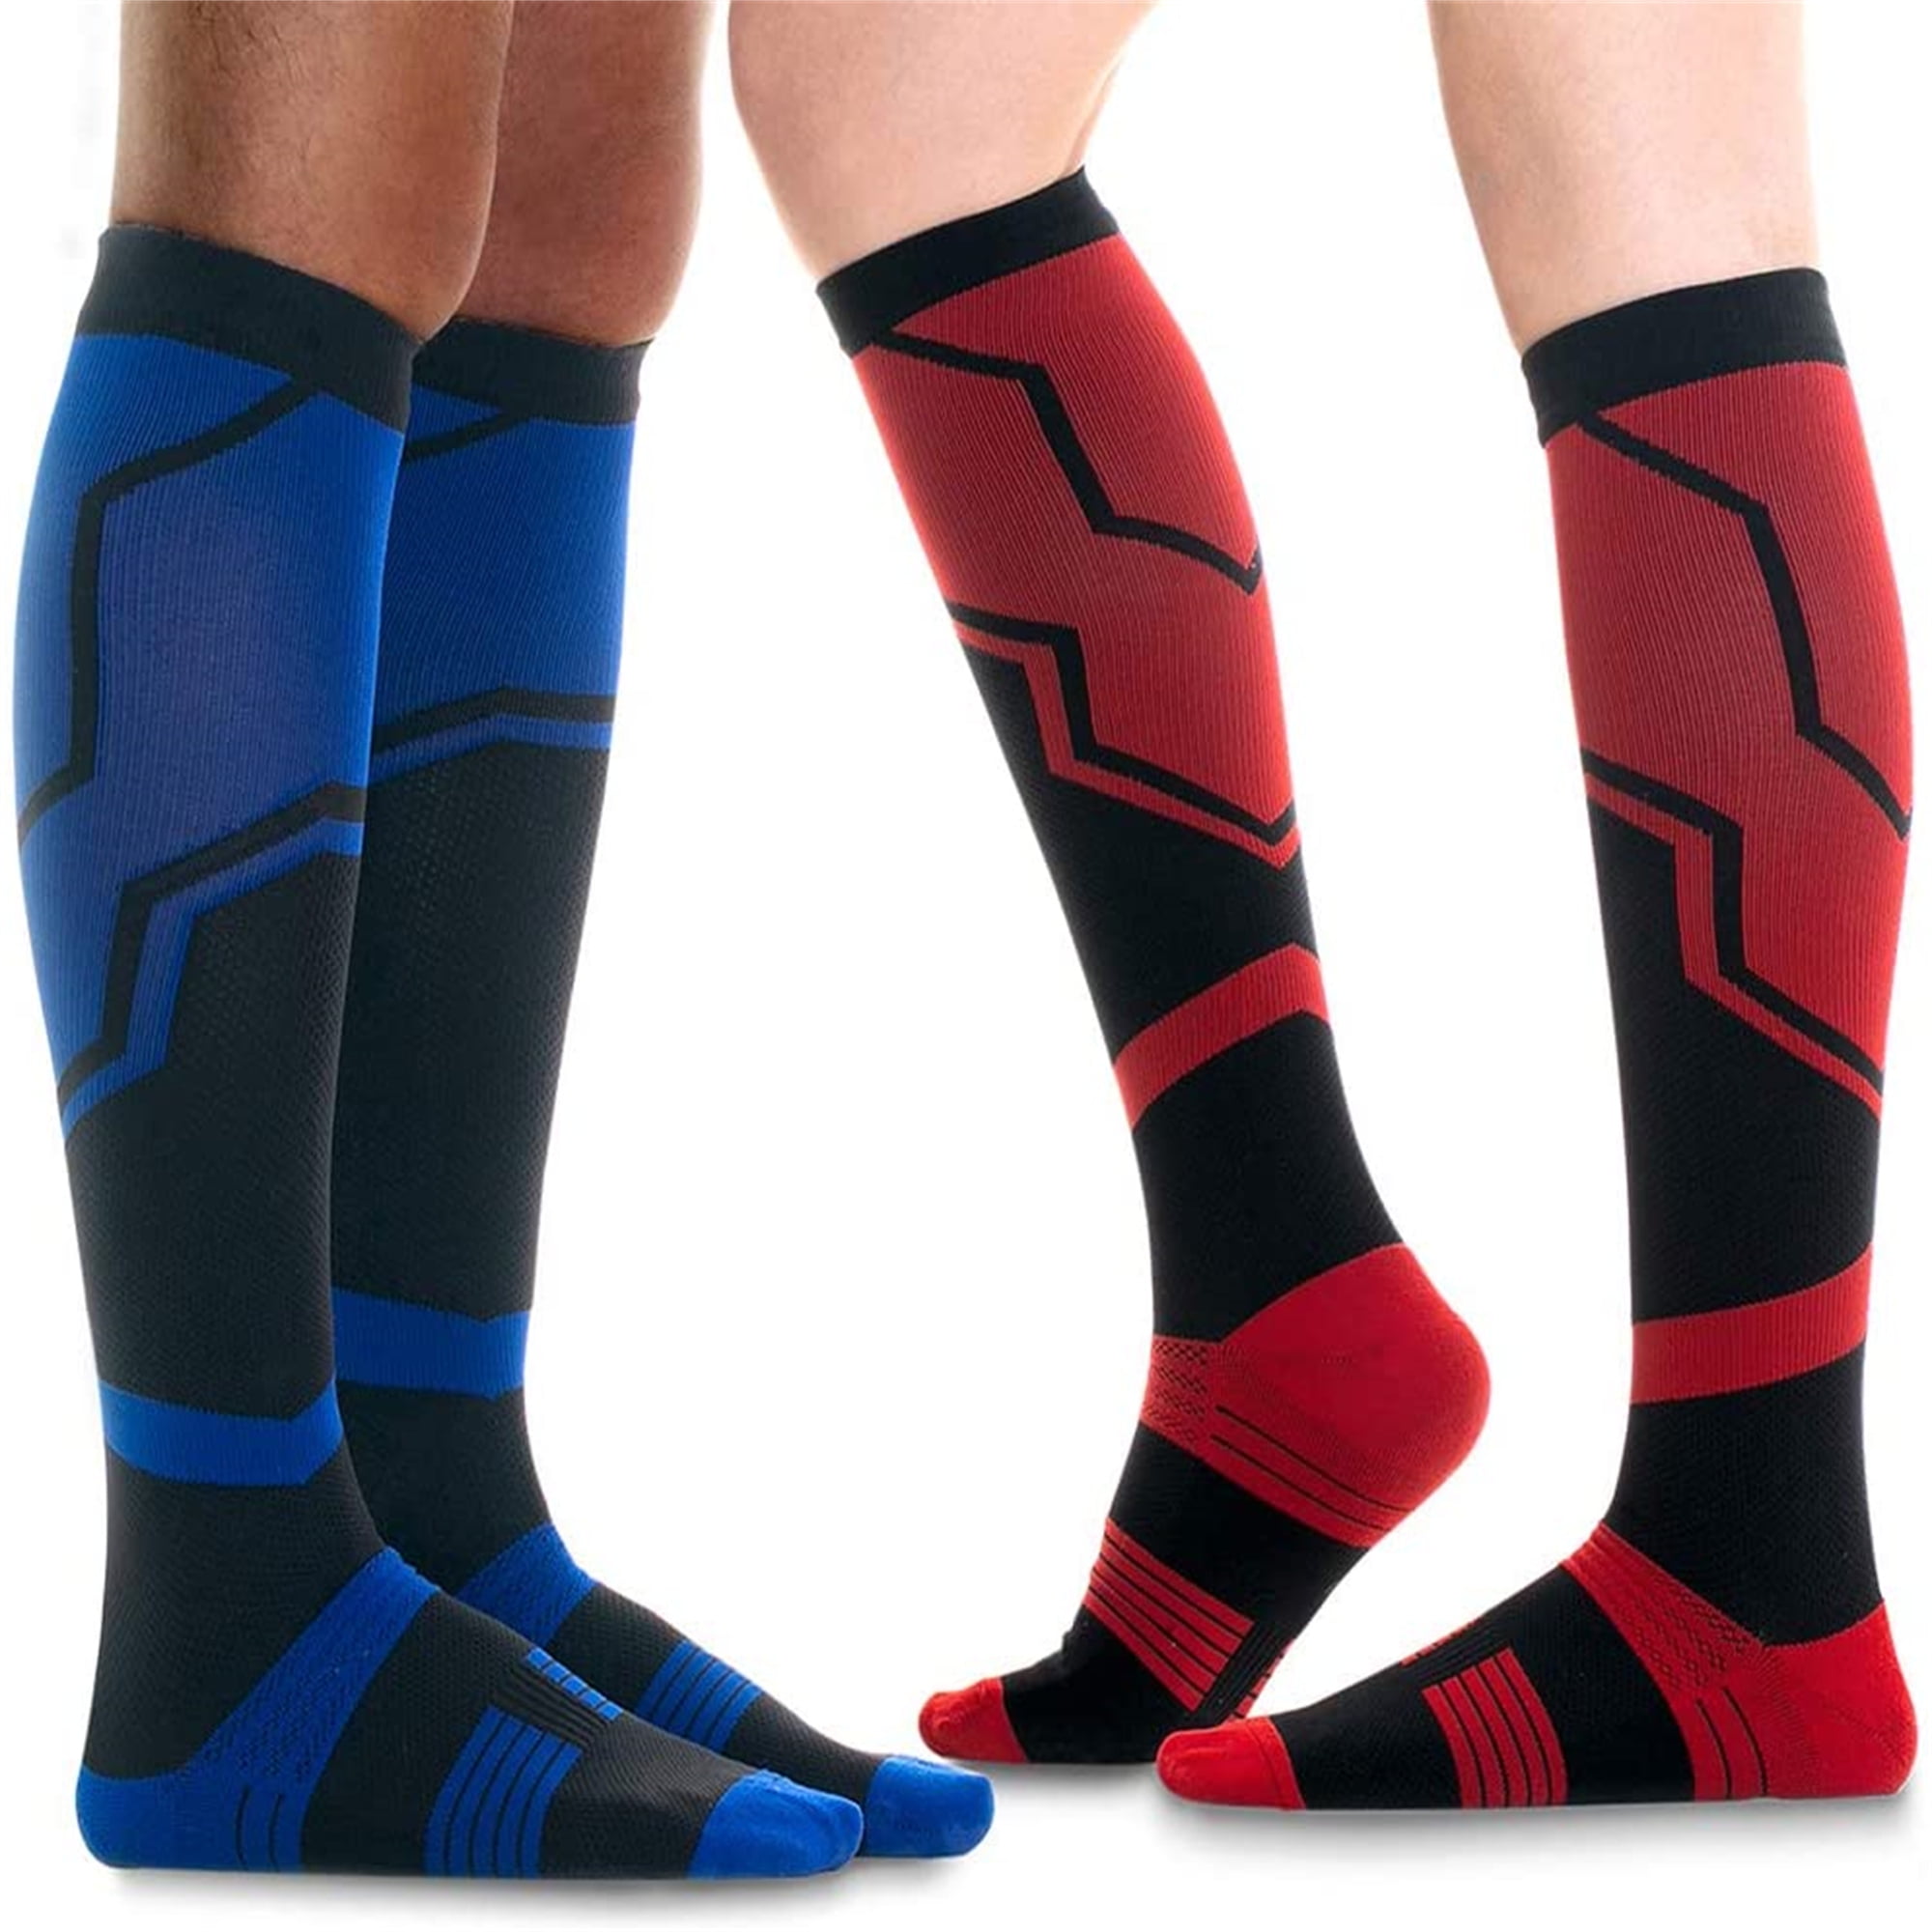 Toes&Feet Mens and Womens 2-Pack Red Anti Odor Quick Dry Compression Ankle Running Socks L